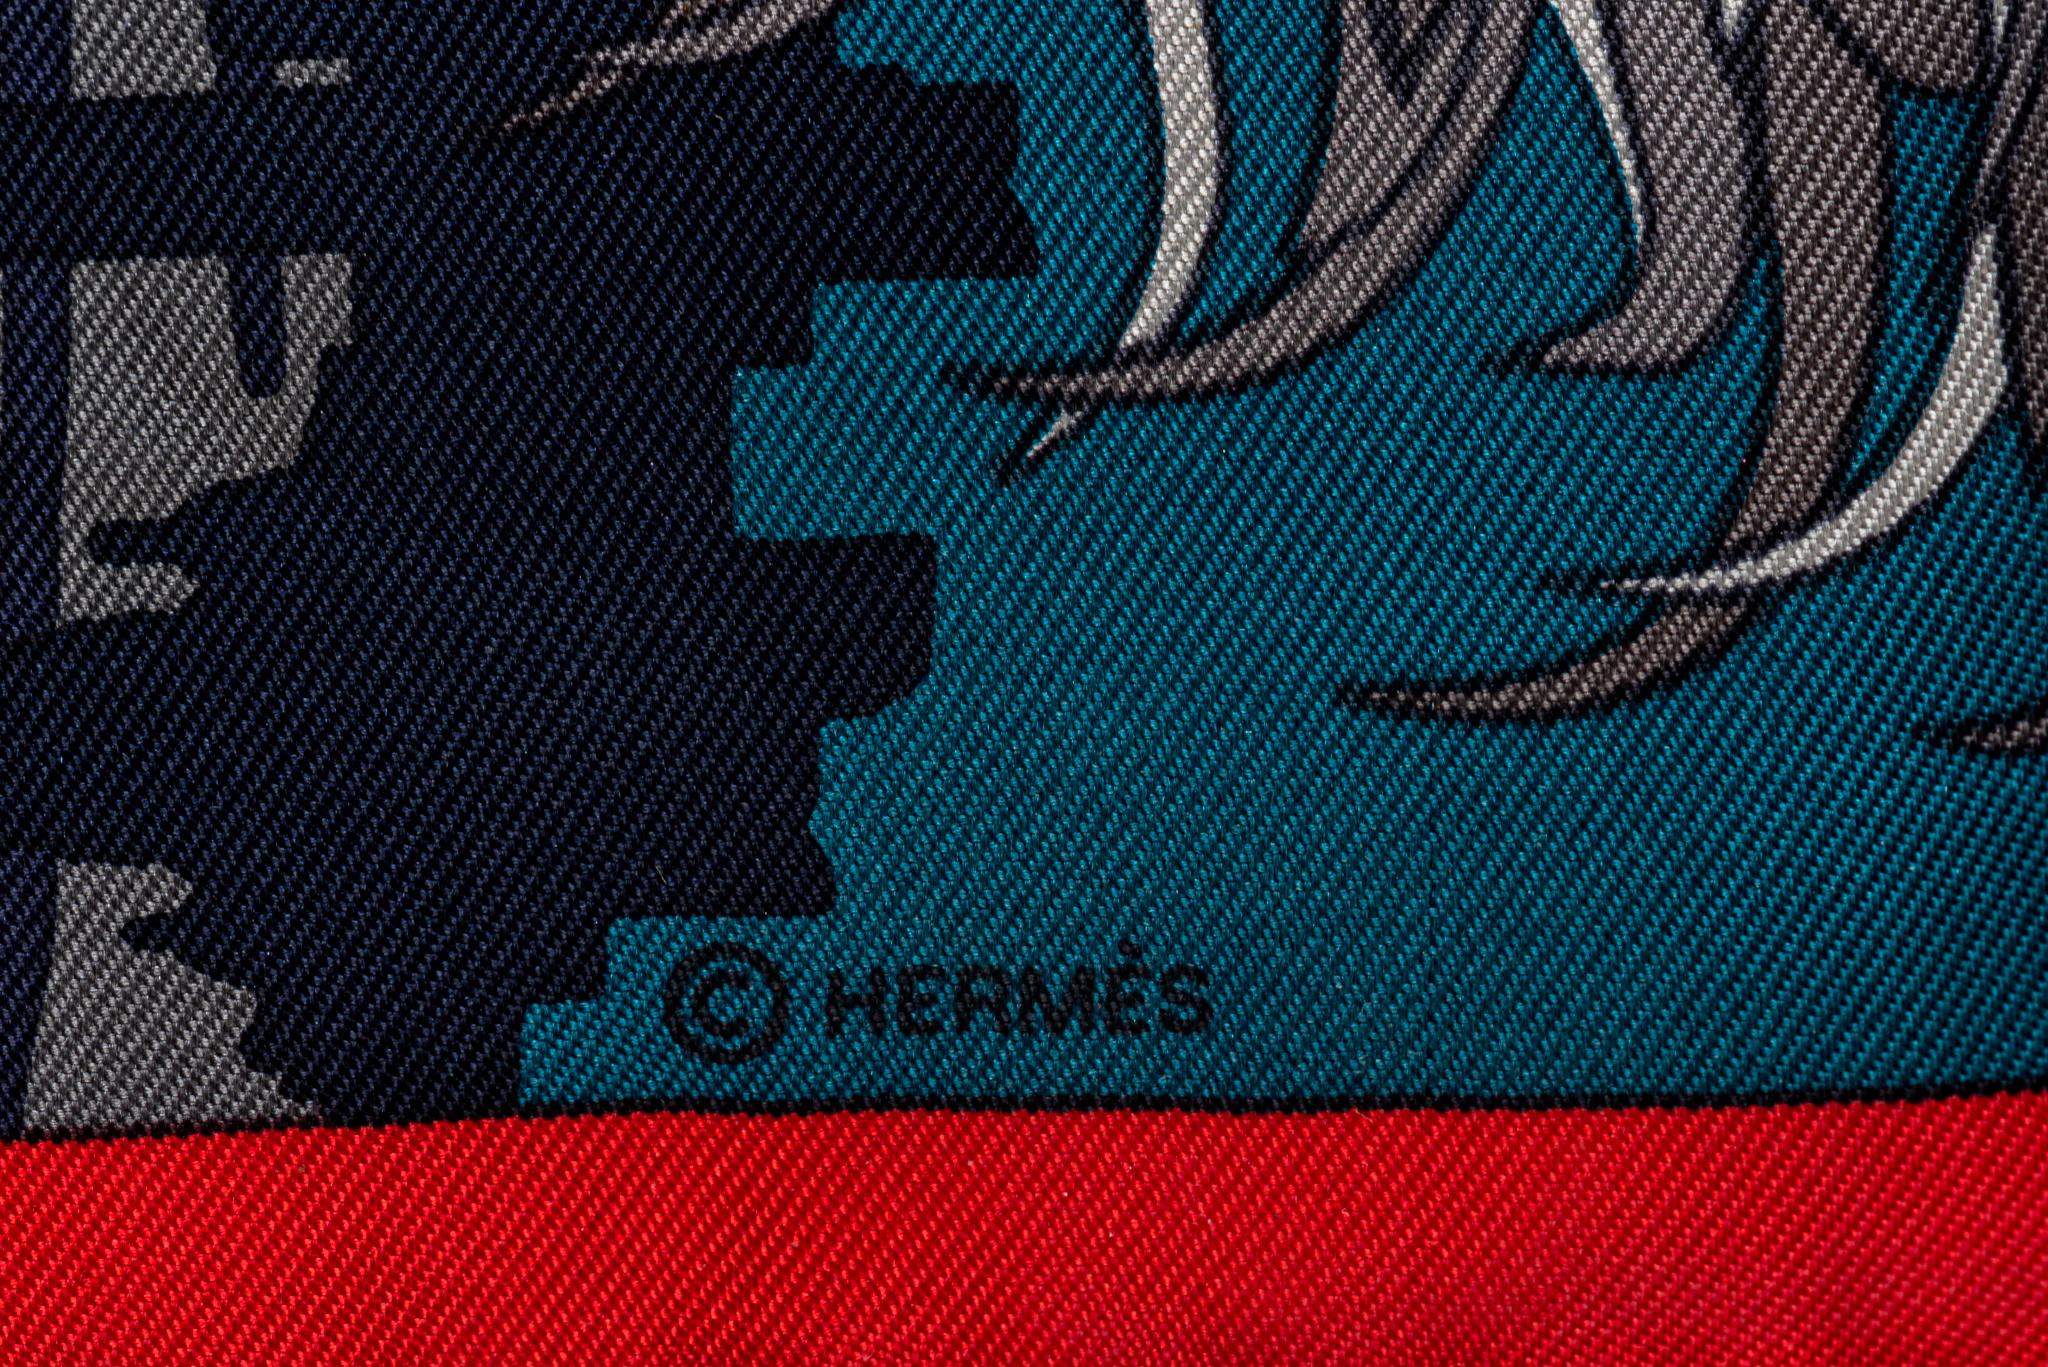 Hermès new red and blue Faubourg silk scarf. Hand-rolled edges. Comes in original box.